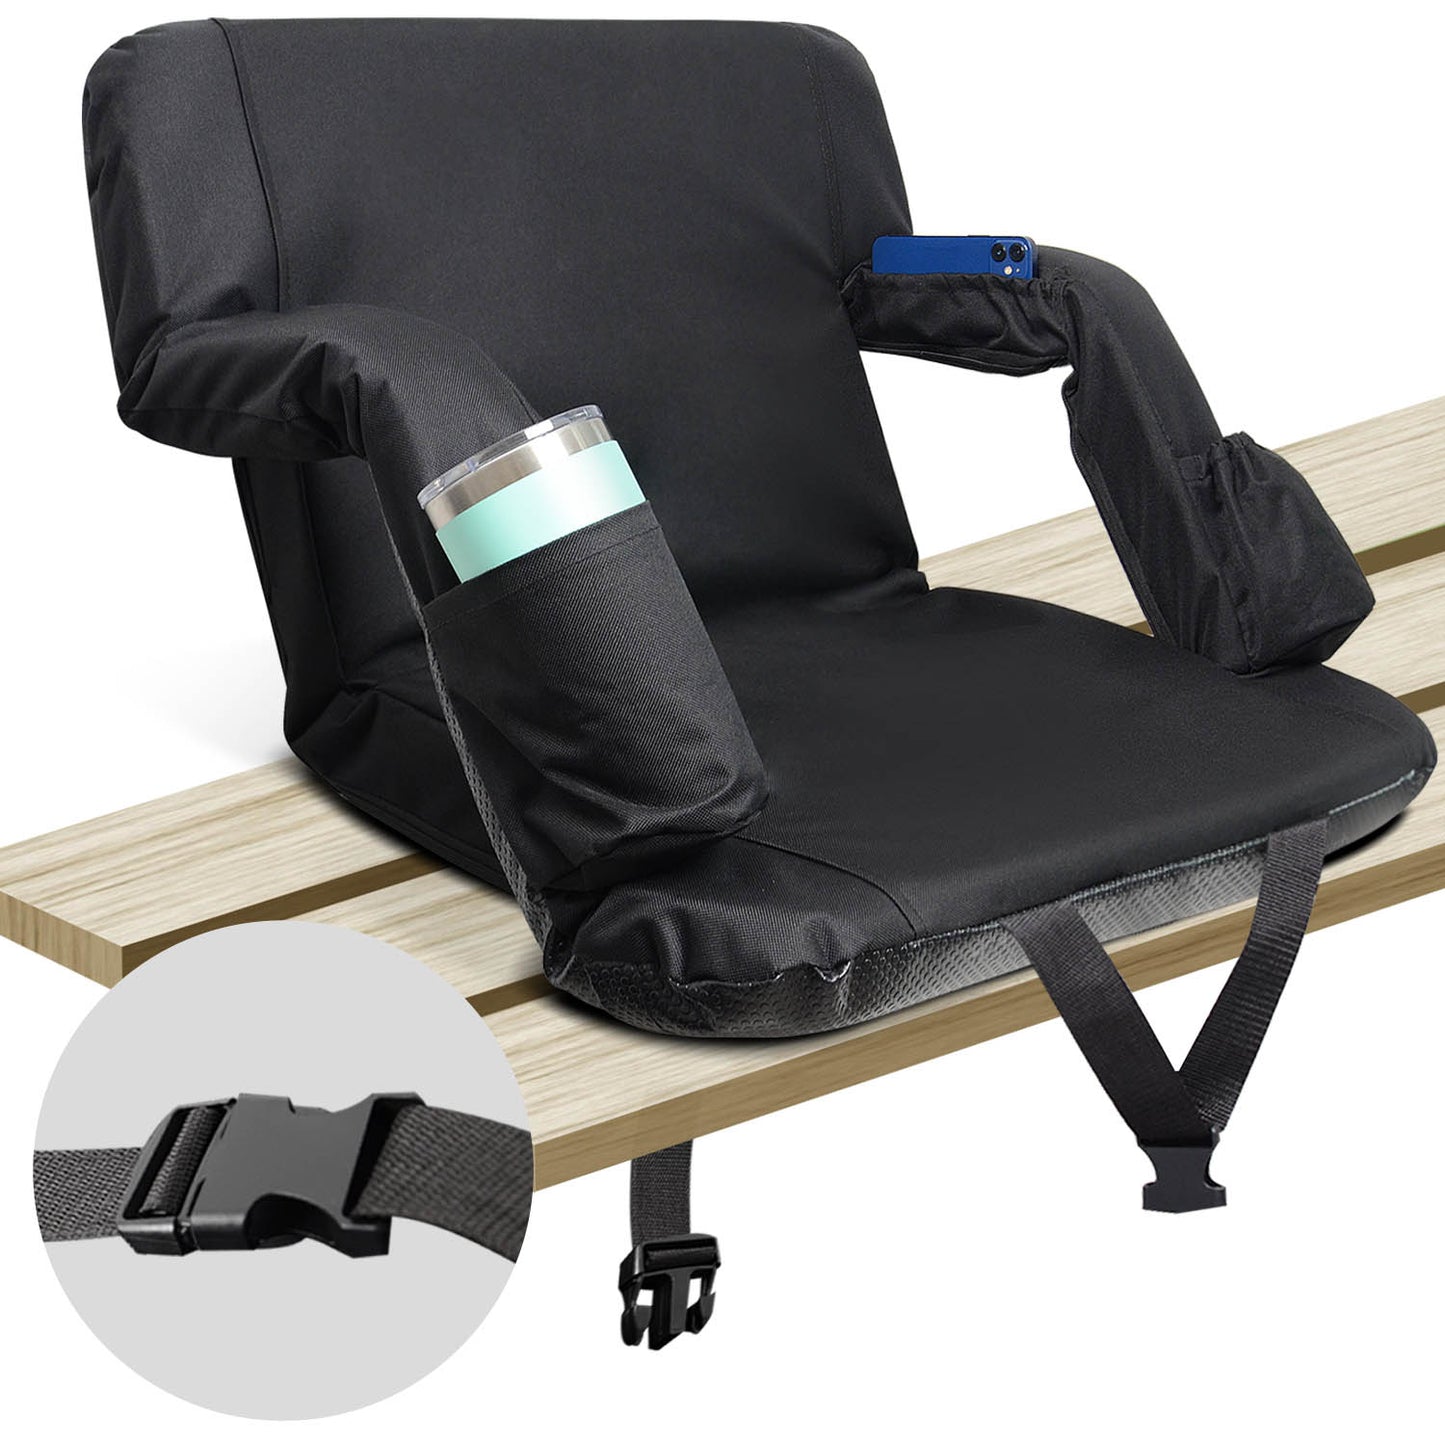 Stadium Seats for Bleachers, Bleacher Seats with Back Support 6 Reclining  Positions, Armrests, Portable Folding Stadium Chairs with Padded Cushion 